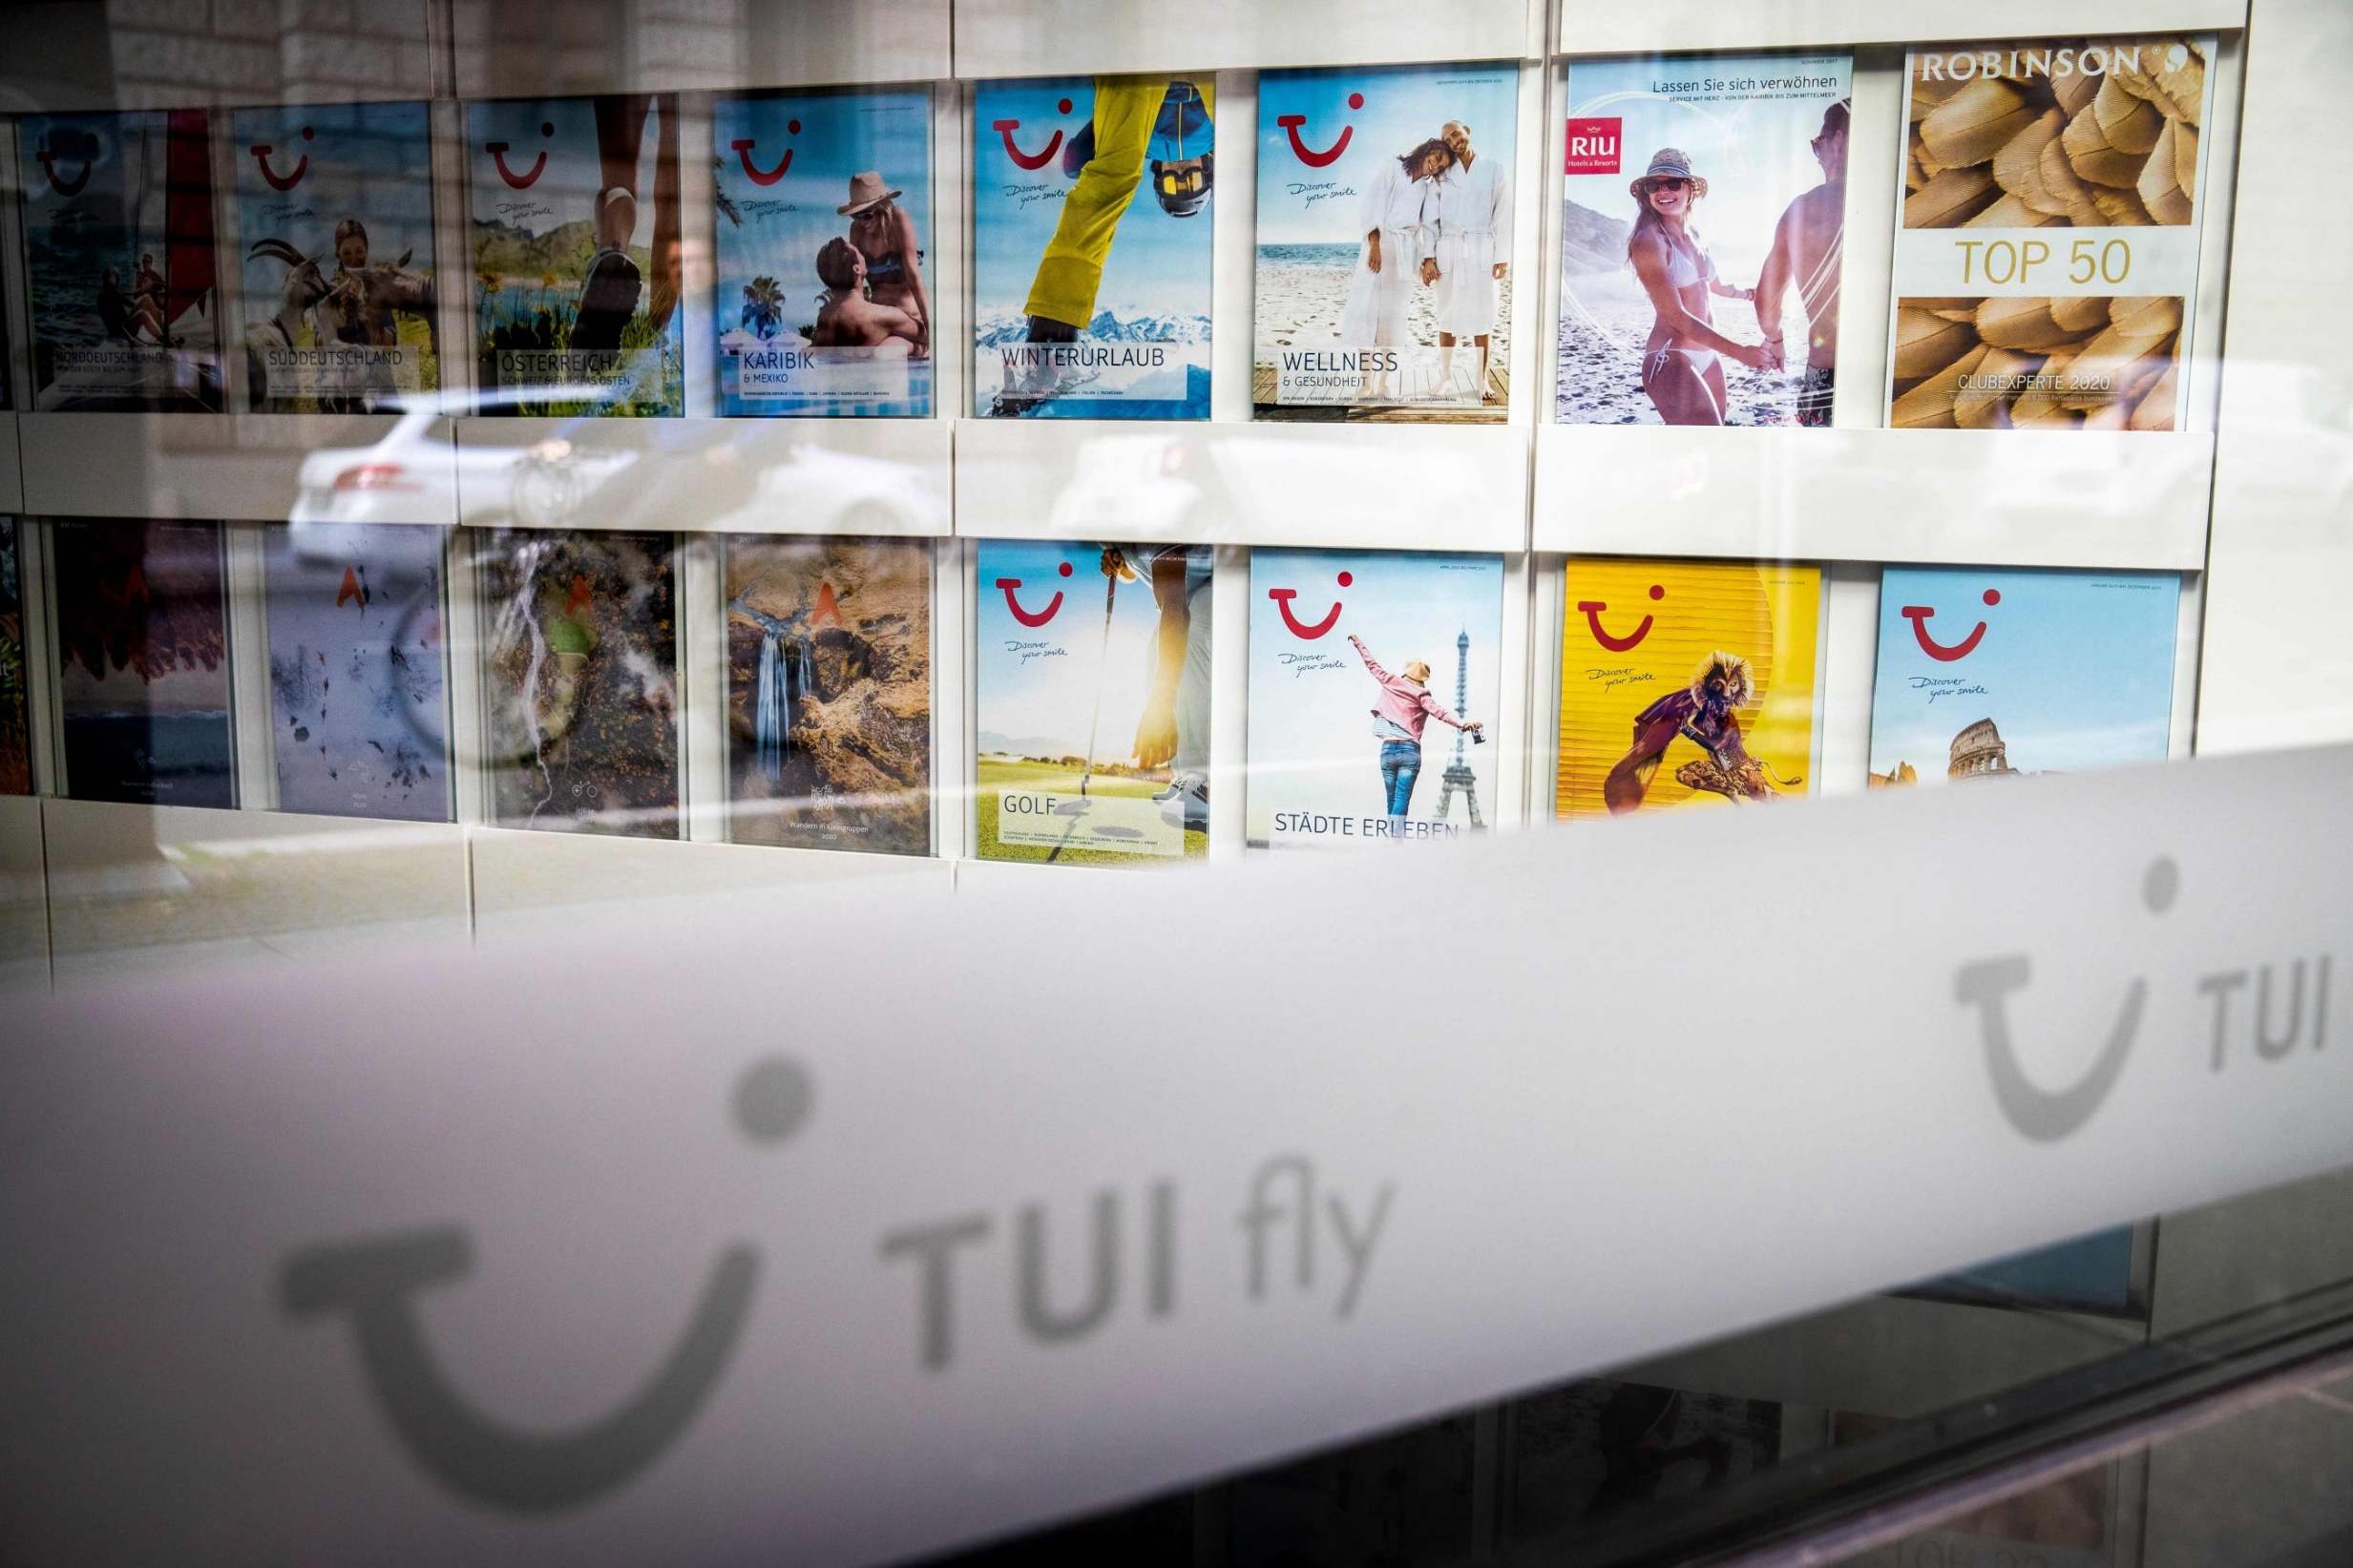 Tui branches across the world have been closed as a result of the pandemic and while some are set to reopen over the coming days, thousands of jobs will be cut, the travel operator has announced